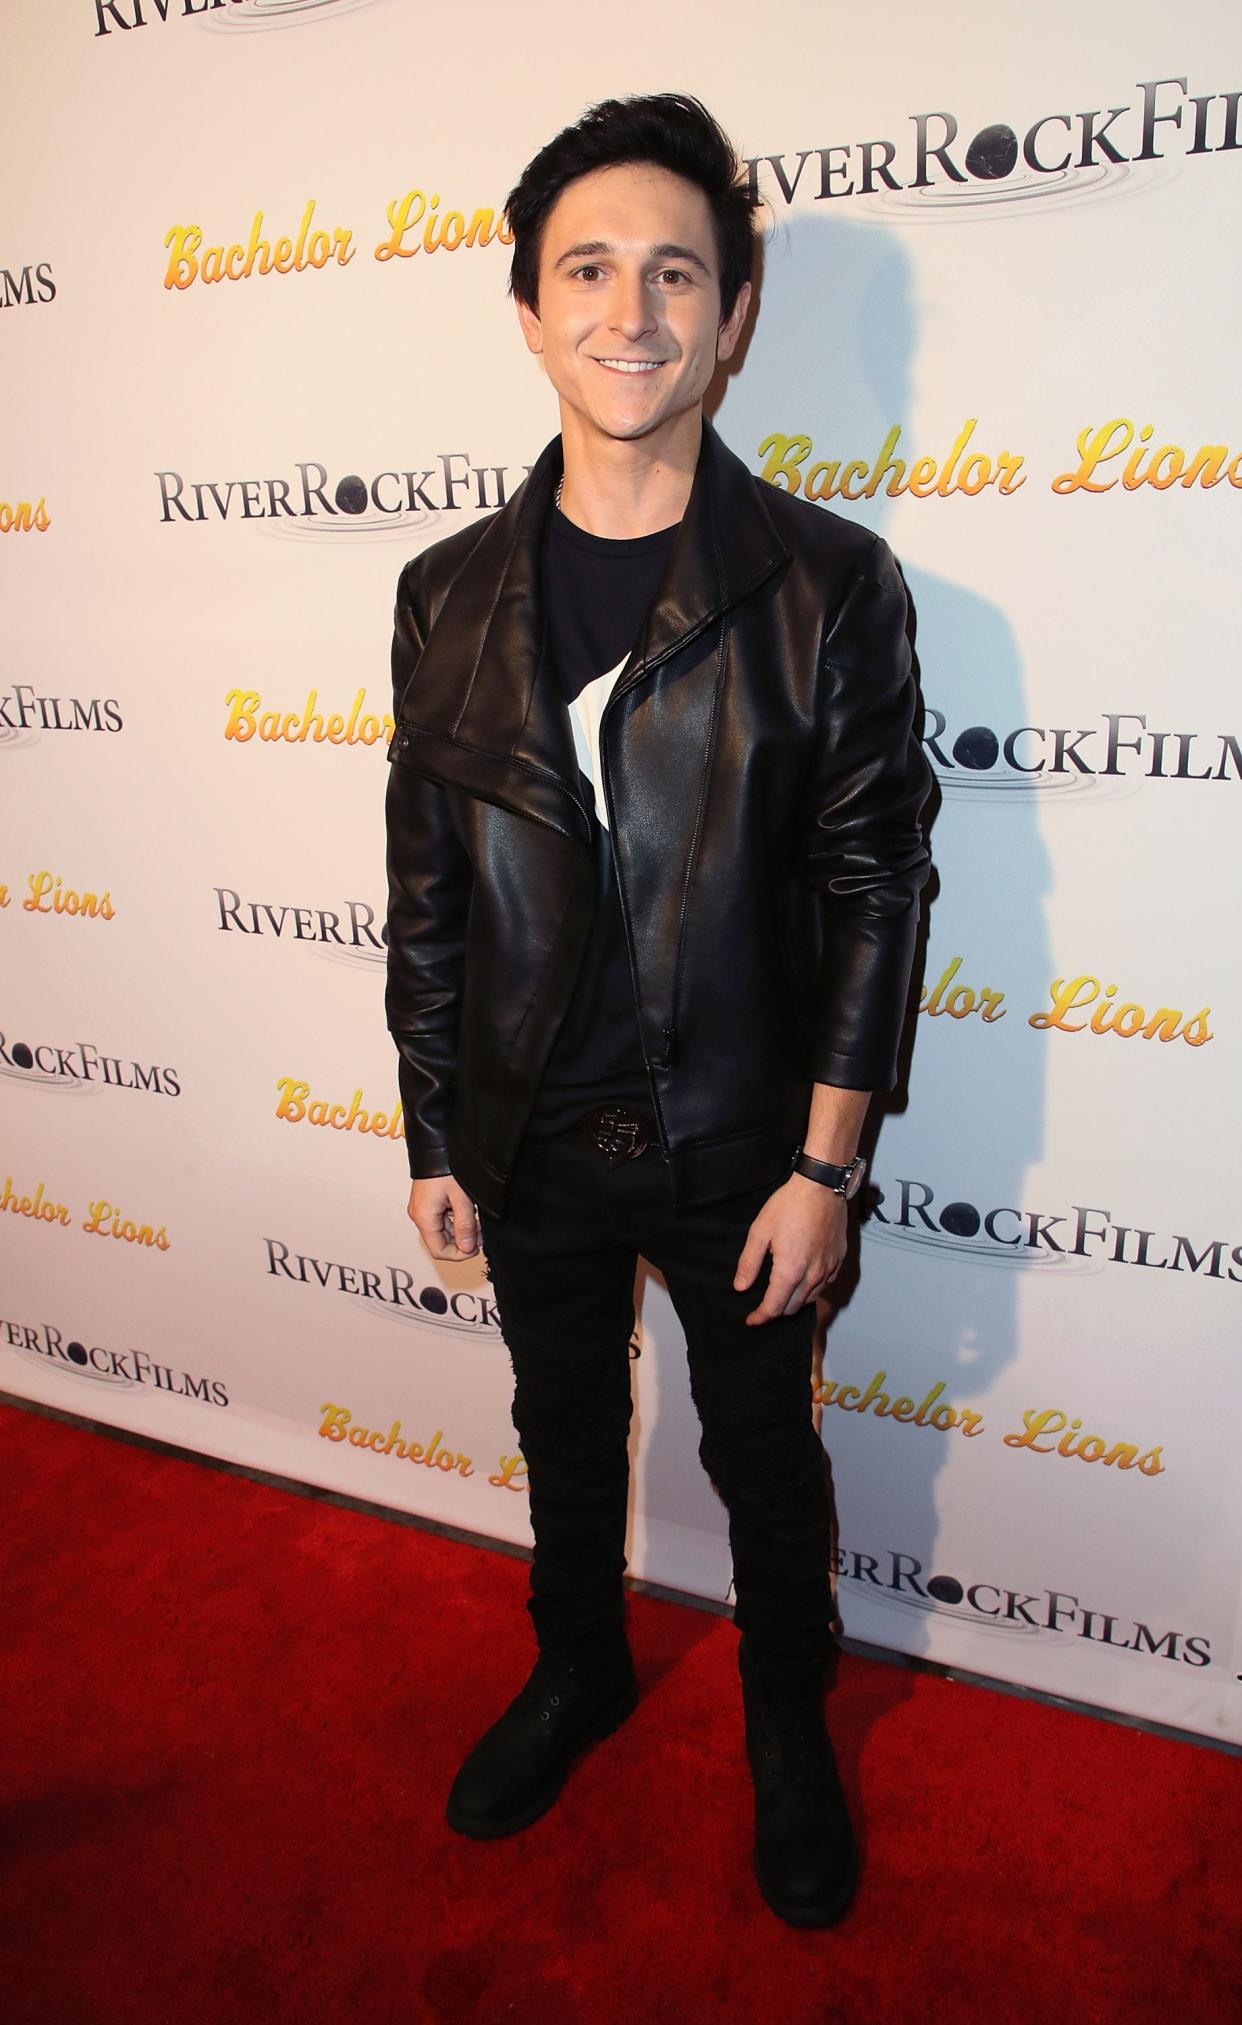 Actor Mitchel Musso attends the premiere of "Bachelor Lions" at ArcLight Hollywood on Jan. 9, 2018, in Hollywood, California.